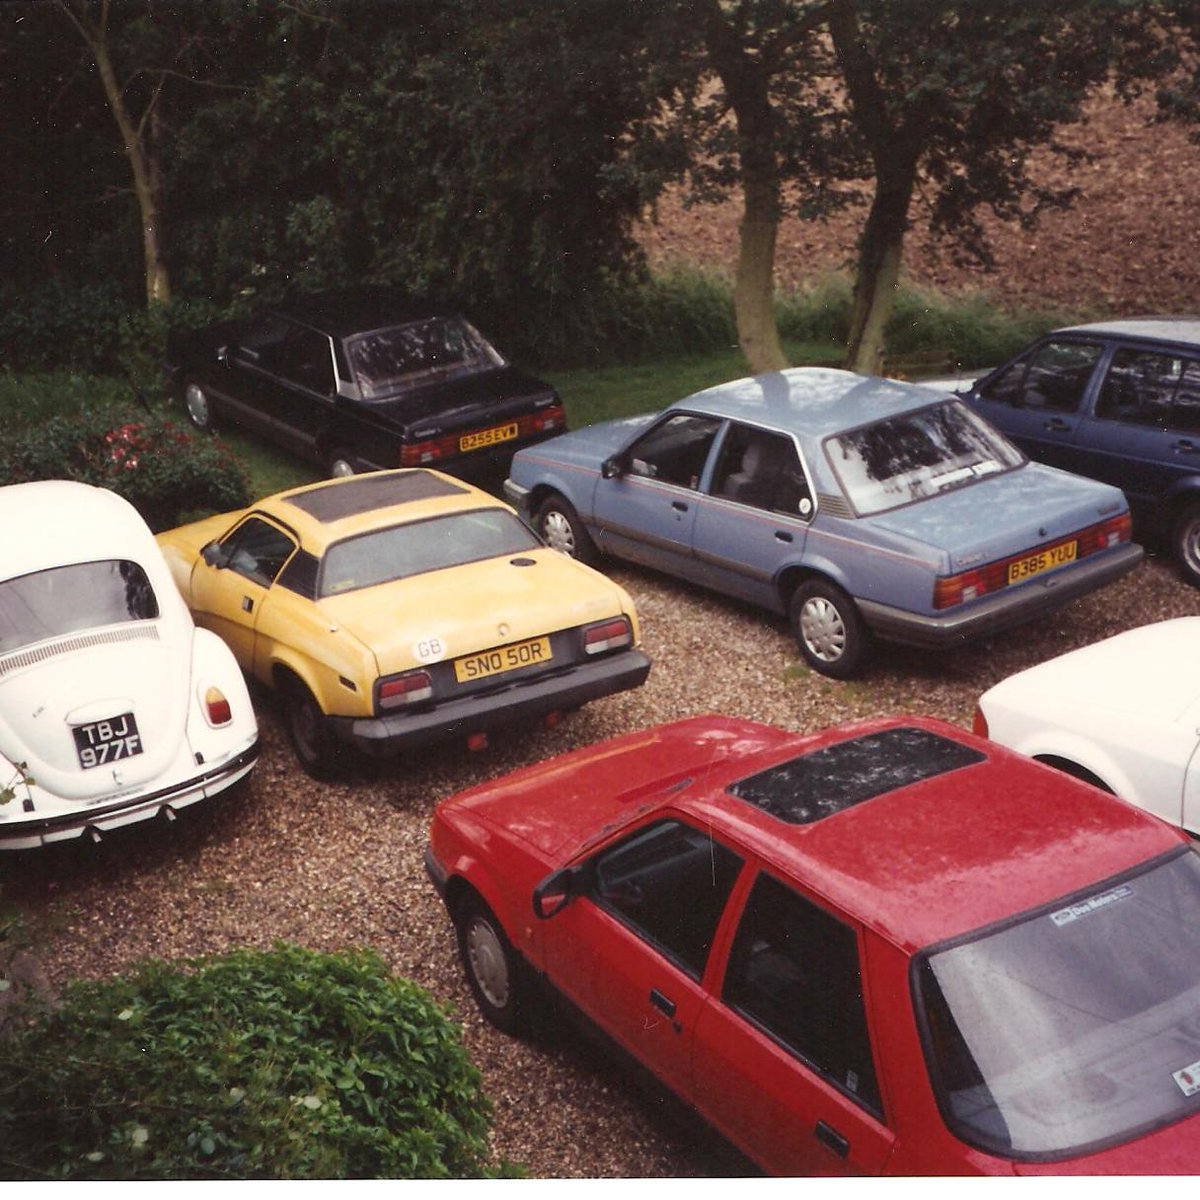 When 'oldschool cars' were just normal transport for me and my friends back in the late 80's/early 90's. #OldSchoolCars #classiccars #VWBeetle #VauxhallCavalierMk2 #TriumphTR7 #VWGolfMk2